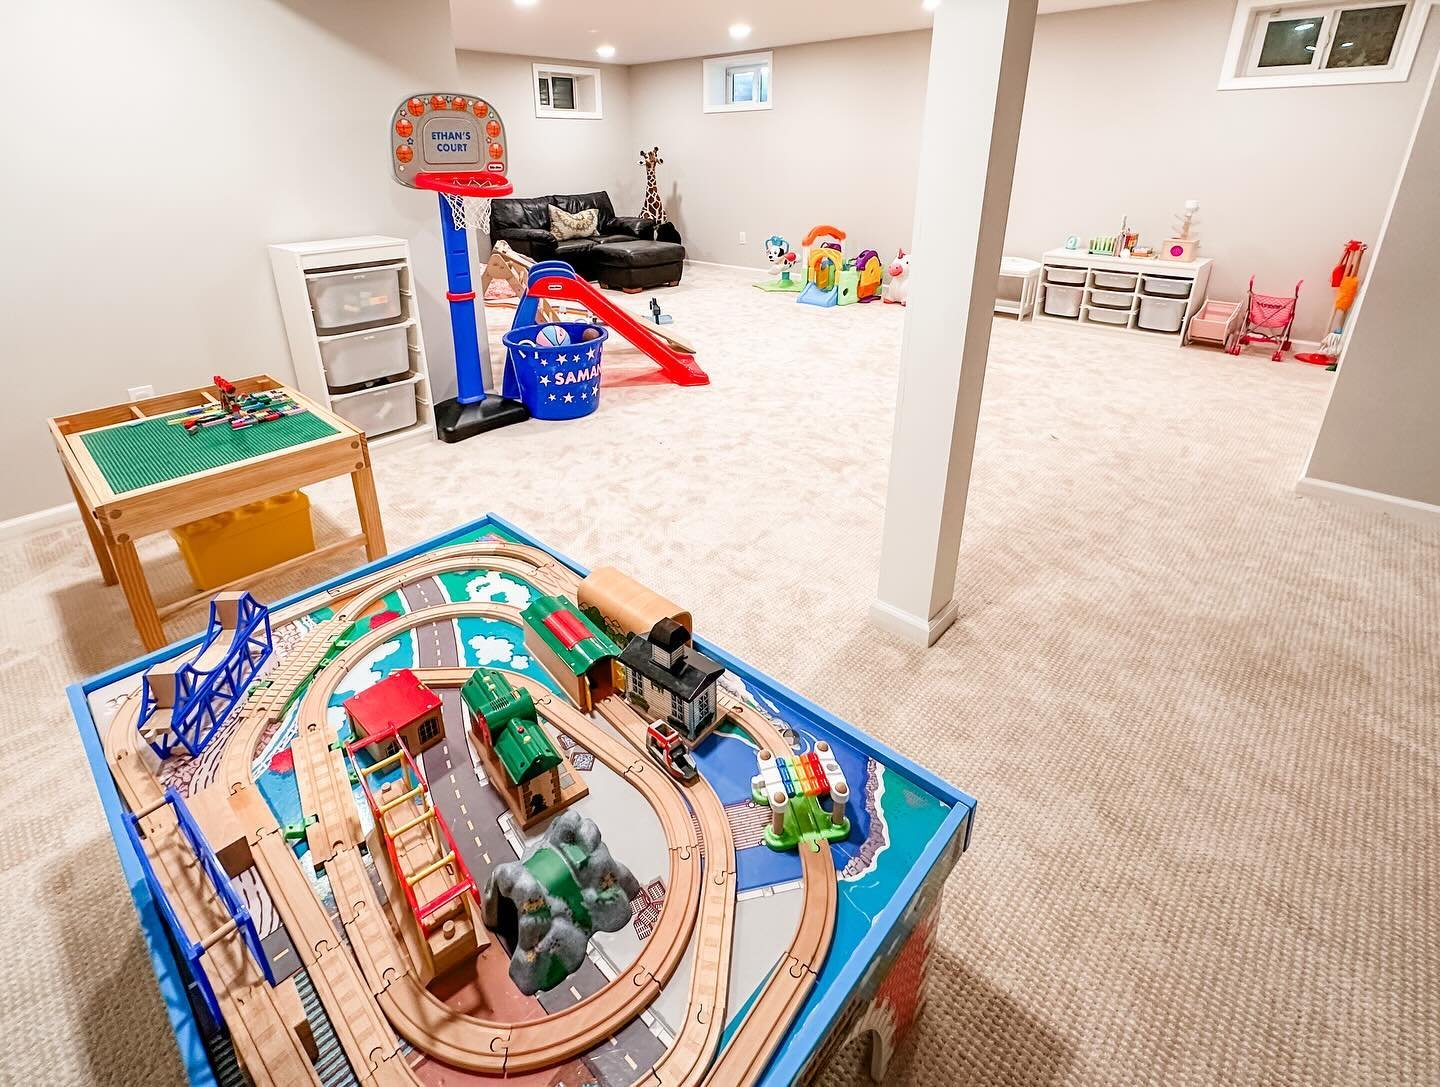 #Playroom calm before the weekend storm! We created zones in this play space and closet to make games easy to access and clean up! Custom picture #labels will be added to ensure everyone can follow the new system. #playroomorganization #playroomideas